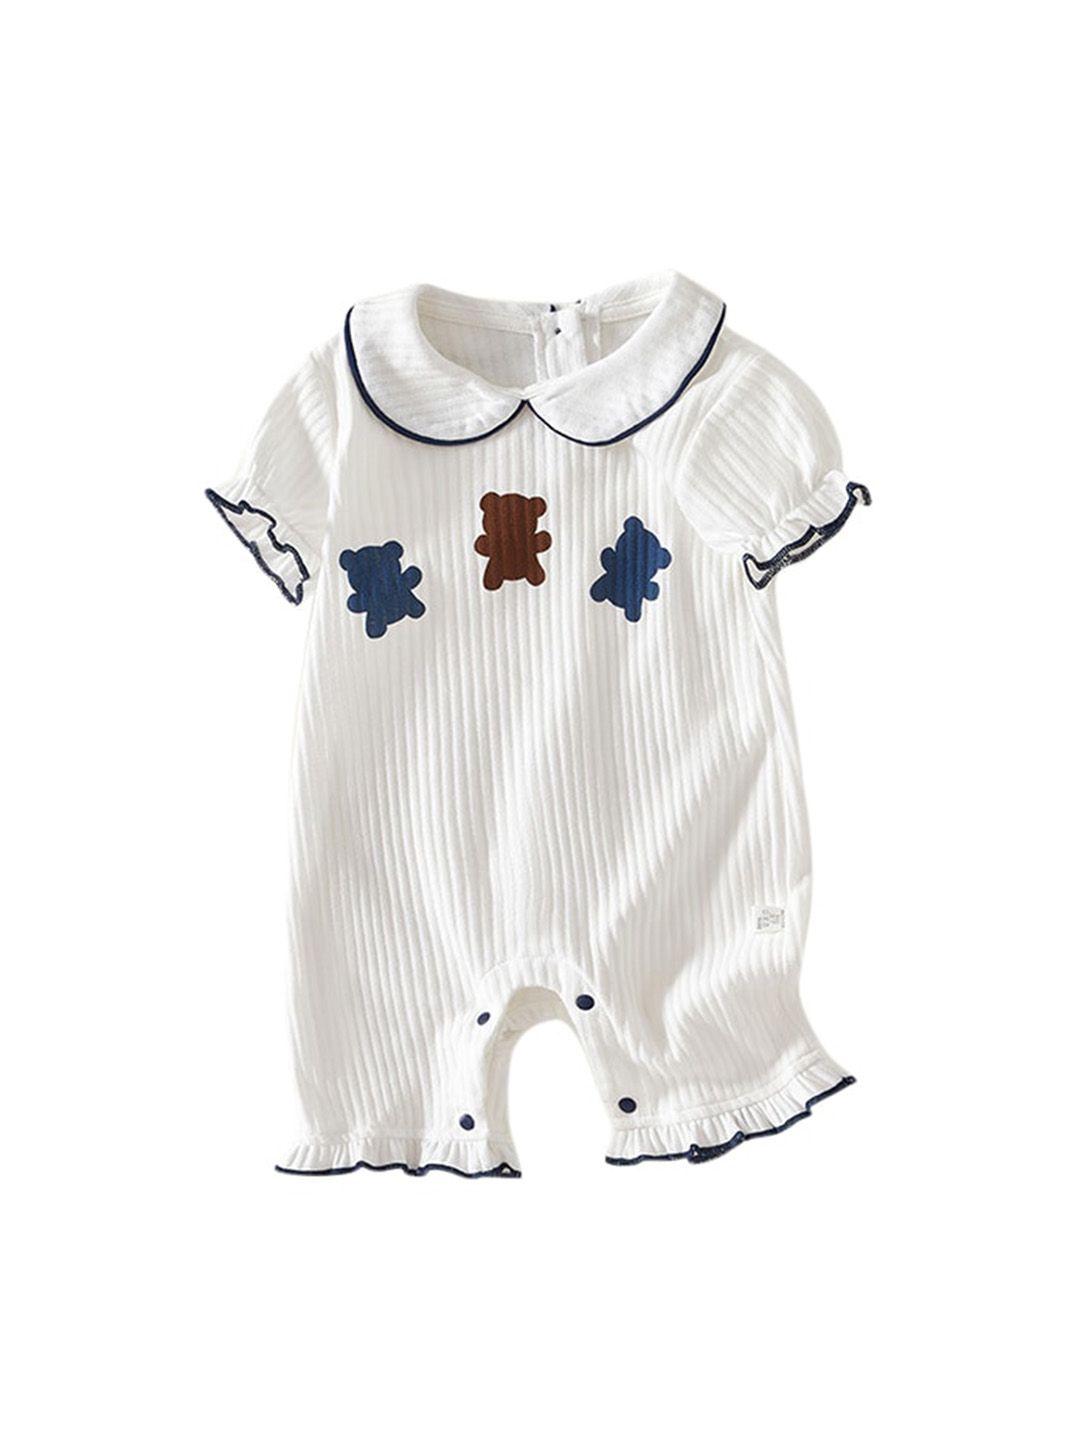 stylecast-infant-girls-white-striped-peter-pan-collar-cotton-rompers